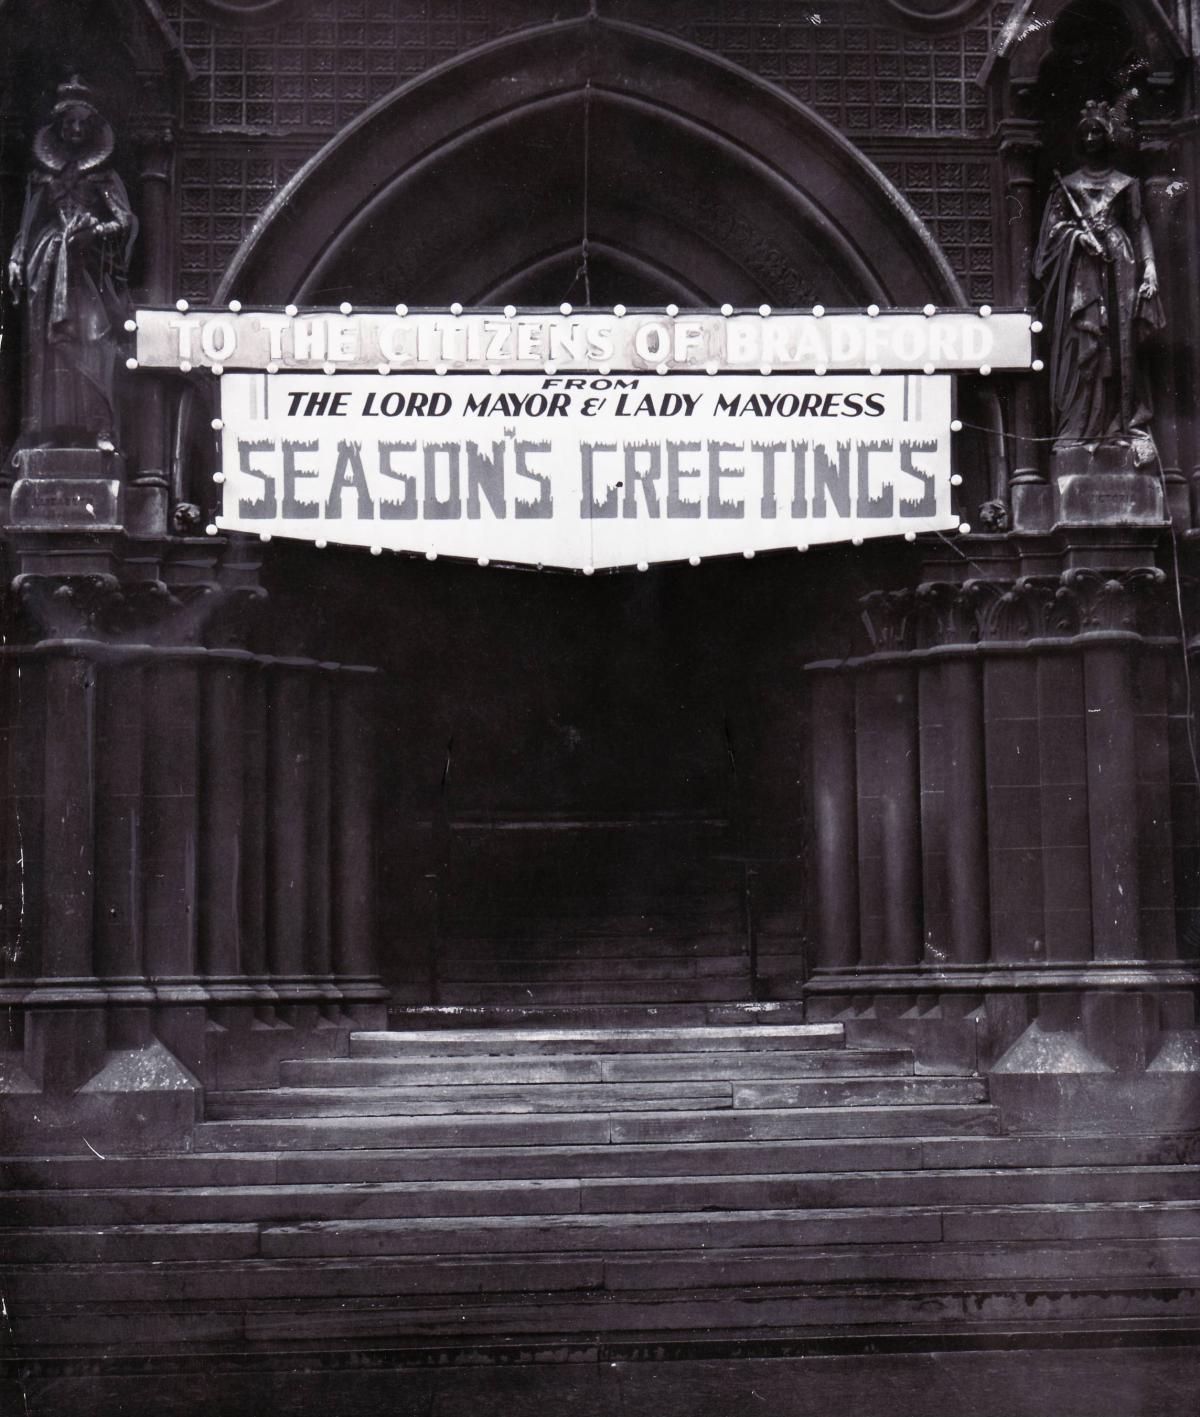 A Christmas message on Bradford Town Hall in 1962